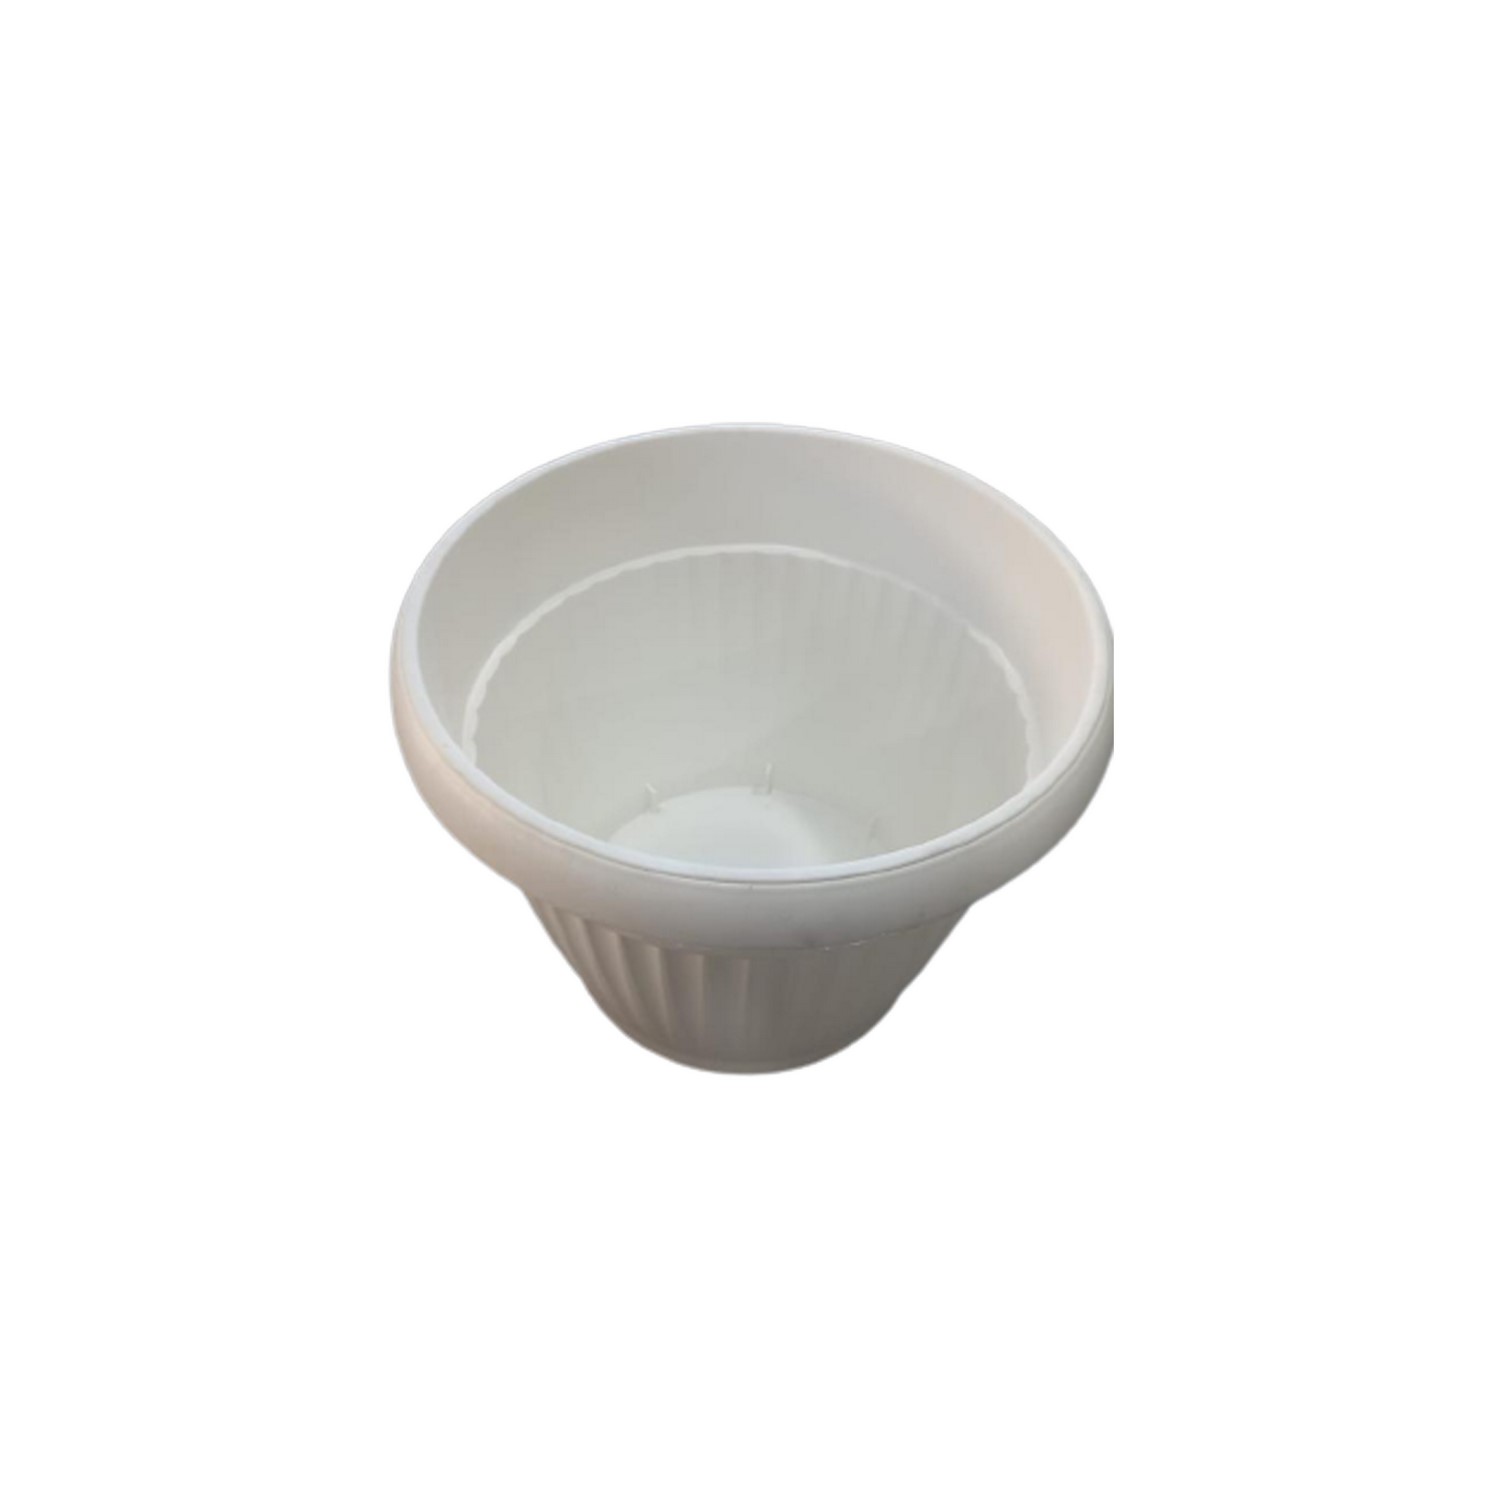 Buy Italian Pot with Base - 50cm - White Online | Agriculture Gardening Tools | Qetaat.com